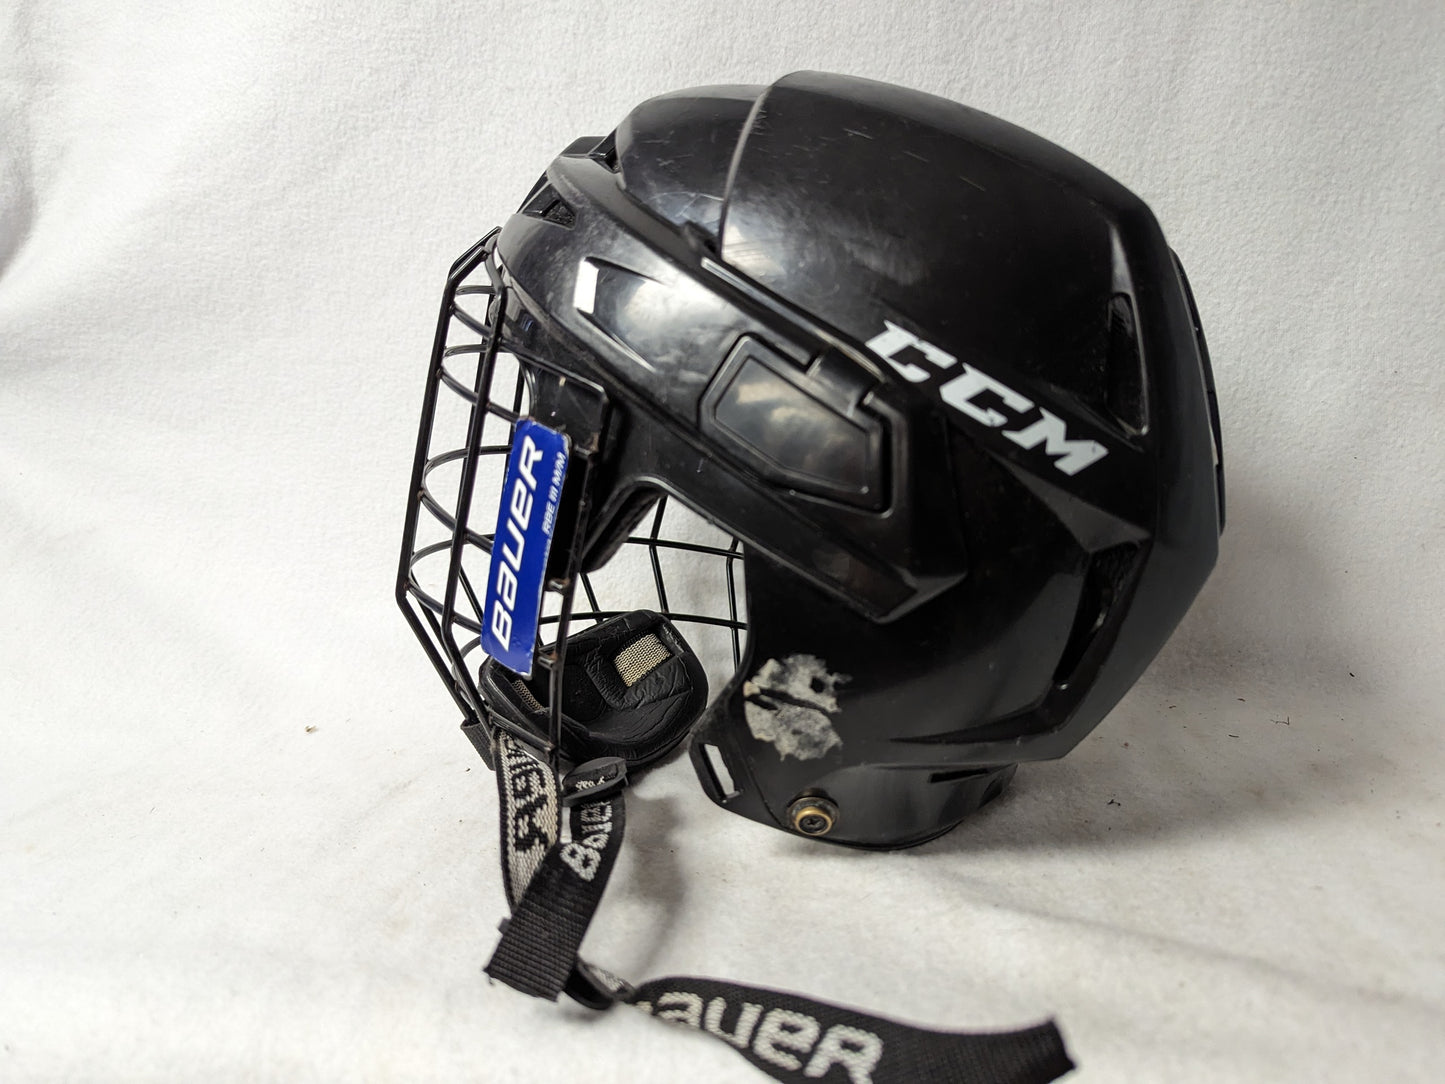 CCM Youth Hockey Helmet w/Cage Size Youth Medium Color Black Condition Used